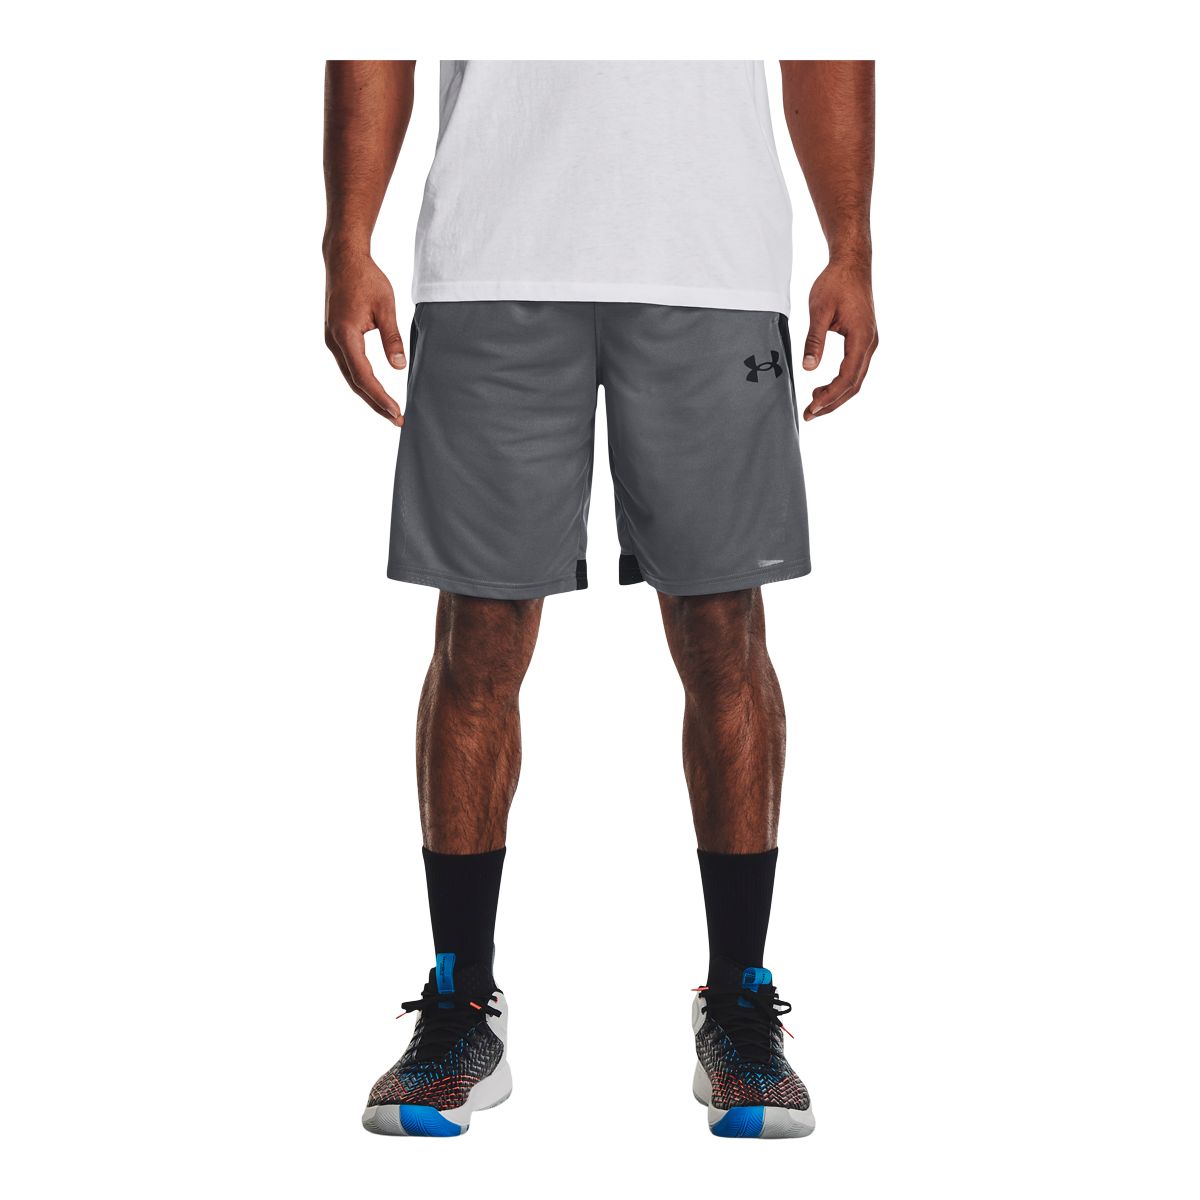 Under Armour Men's Baseline 10-in Basketball Shorts Loose Fit